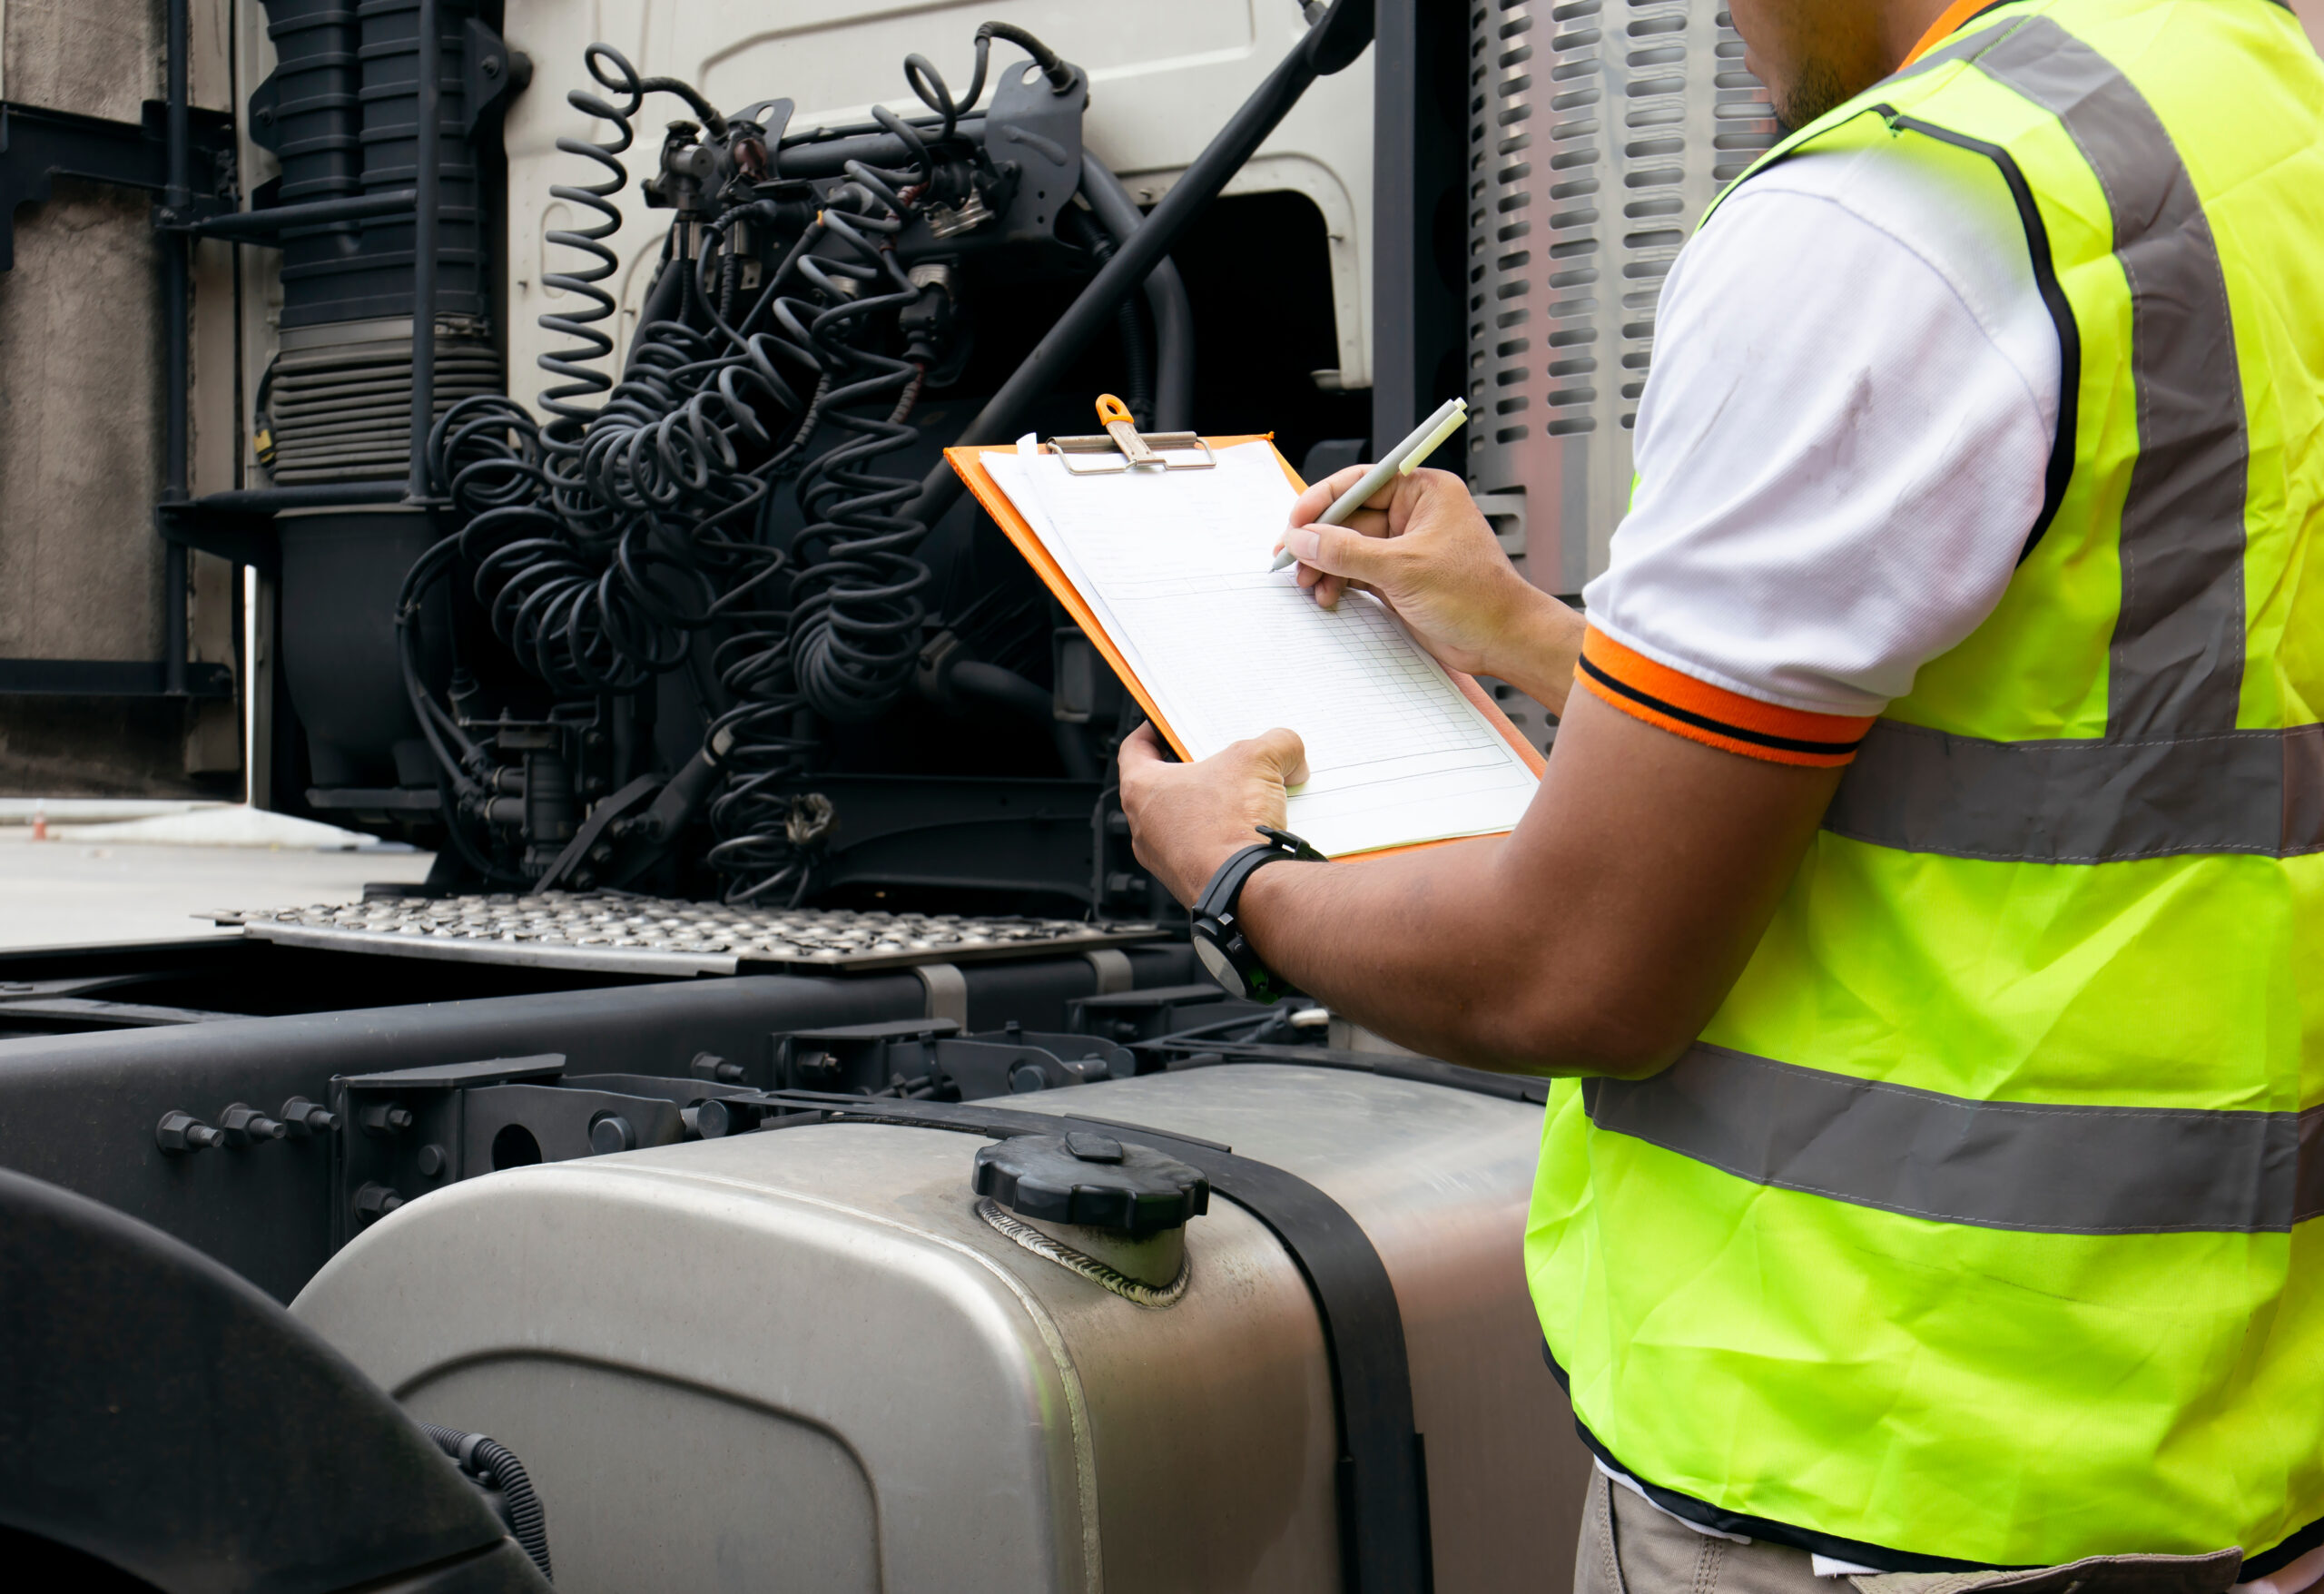 Image of a man wearring ang safety vest while taking down notes for truck maintenance